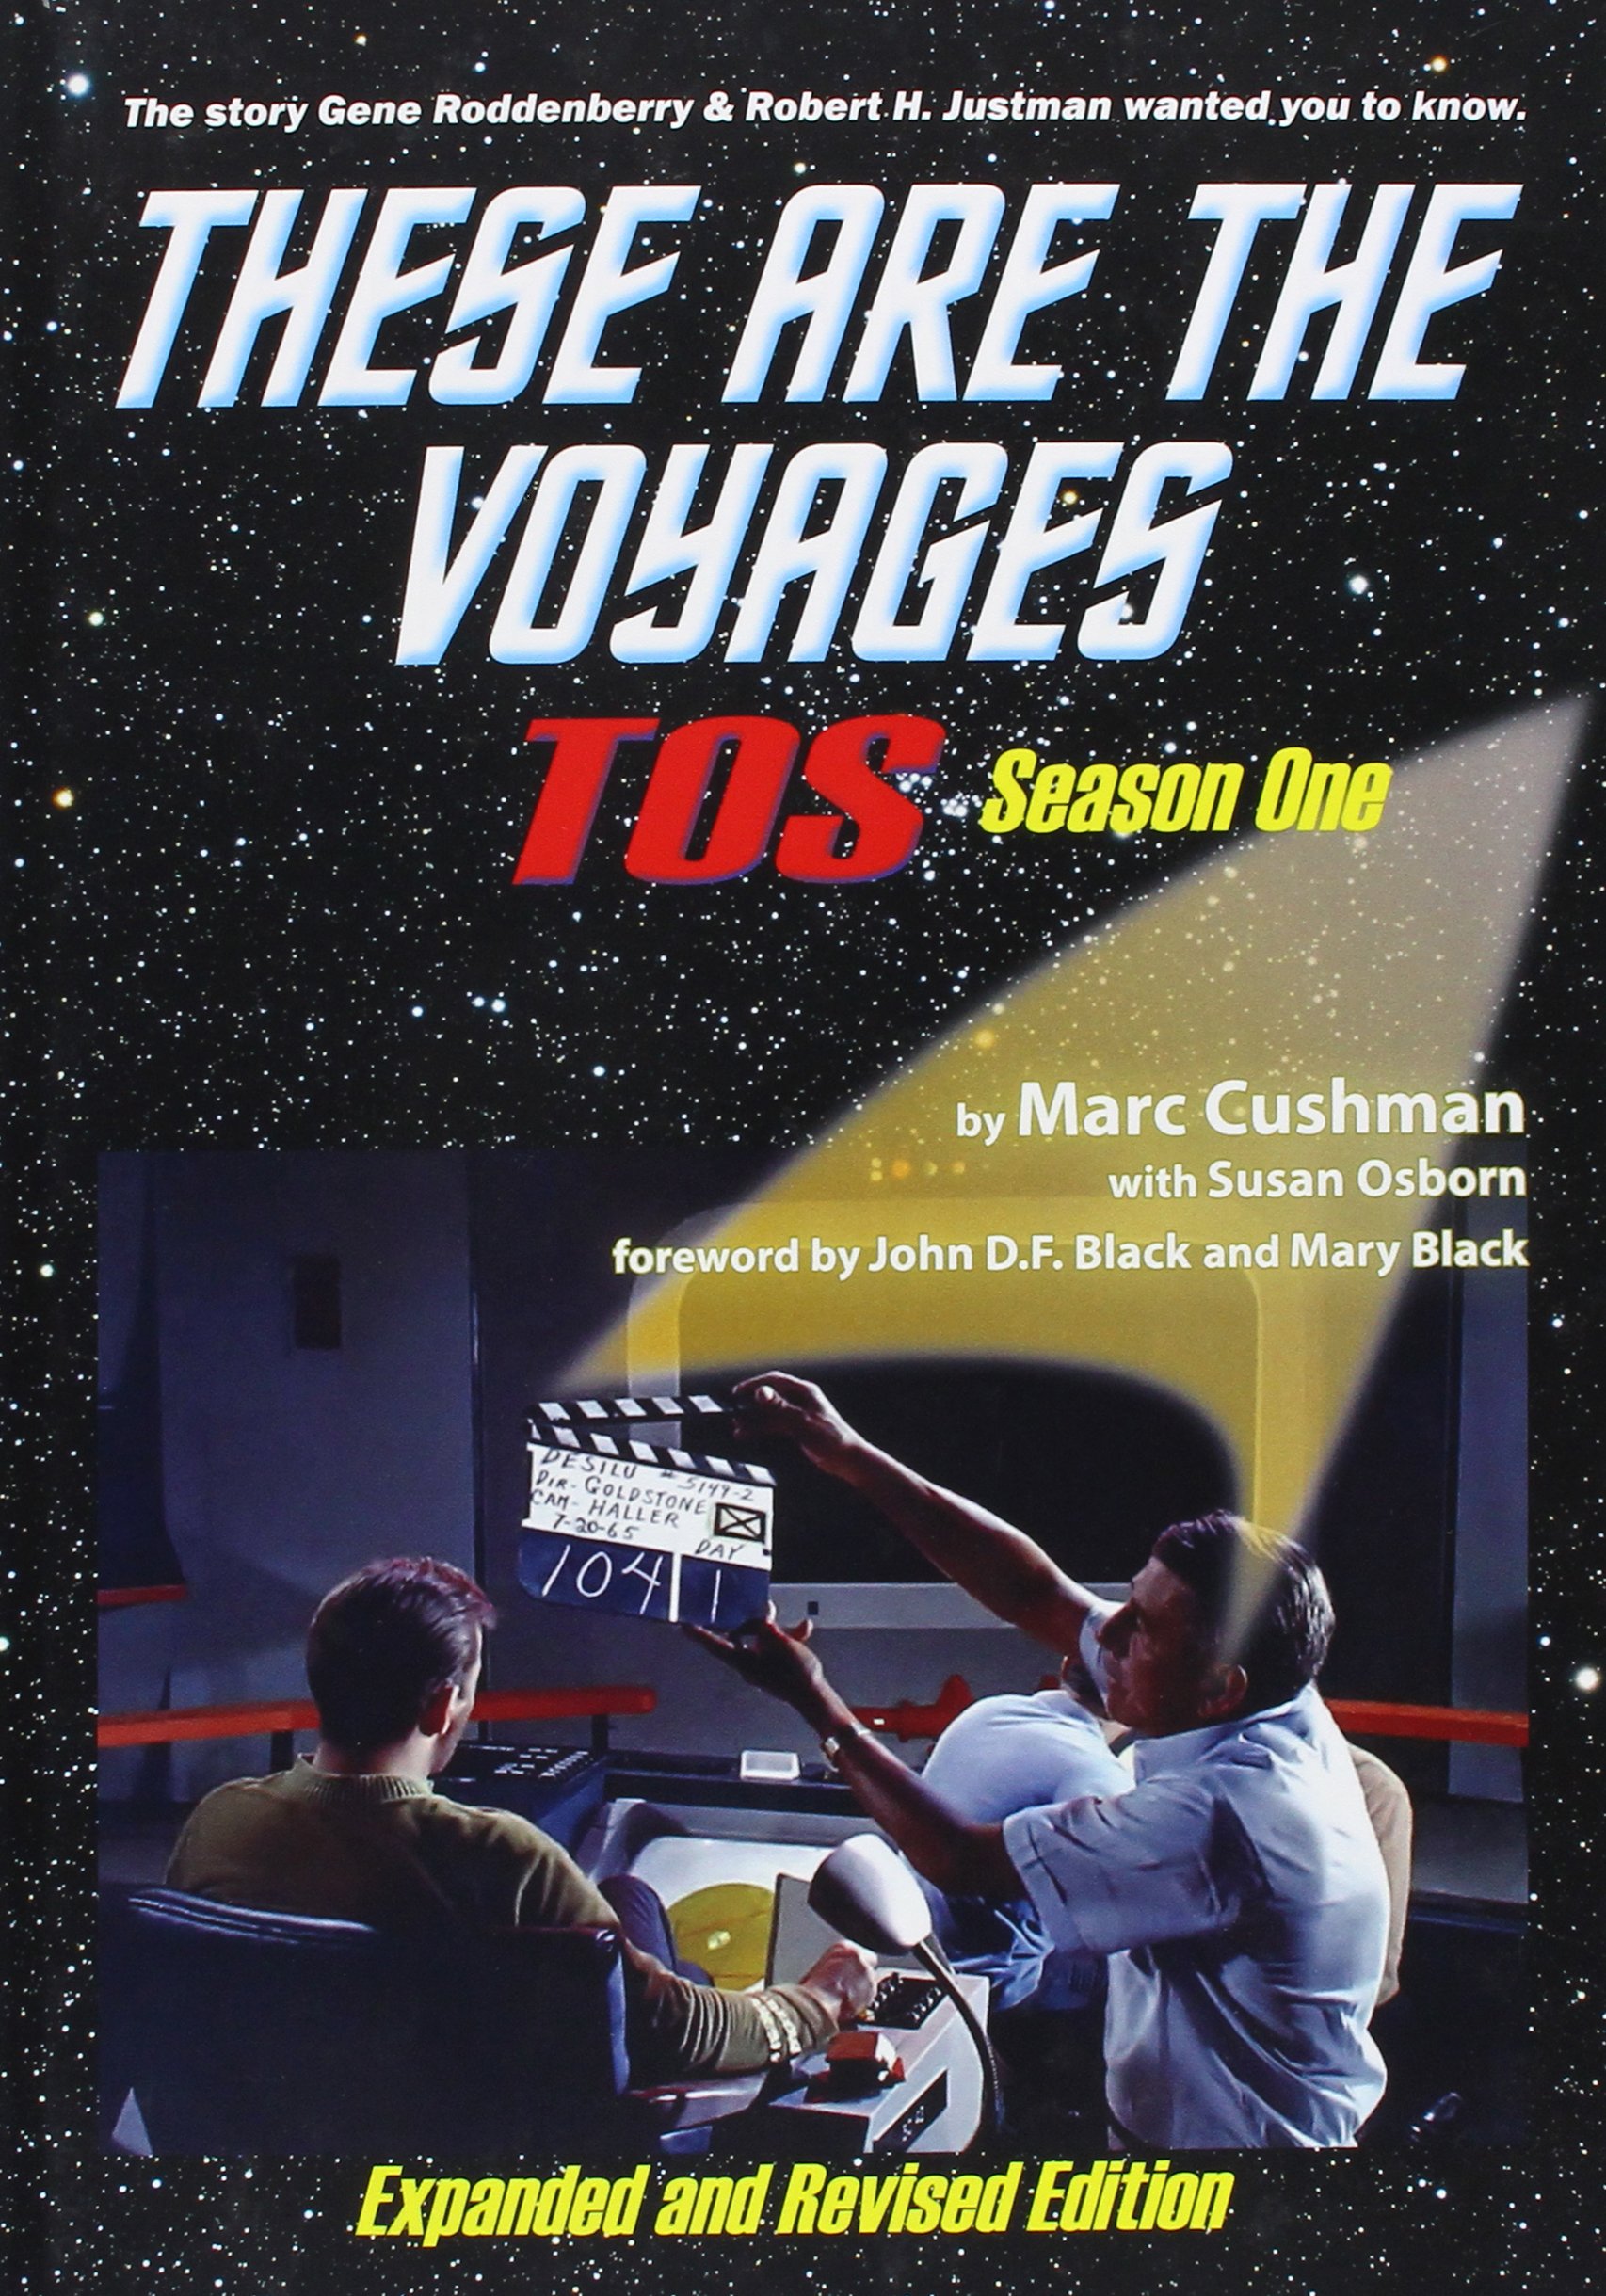 “These Are the Voyages: TOS: Season 1 Revised and Expanded Edition” Review by Borg.com